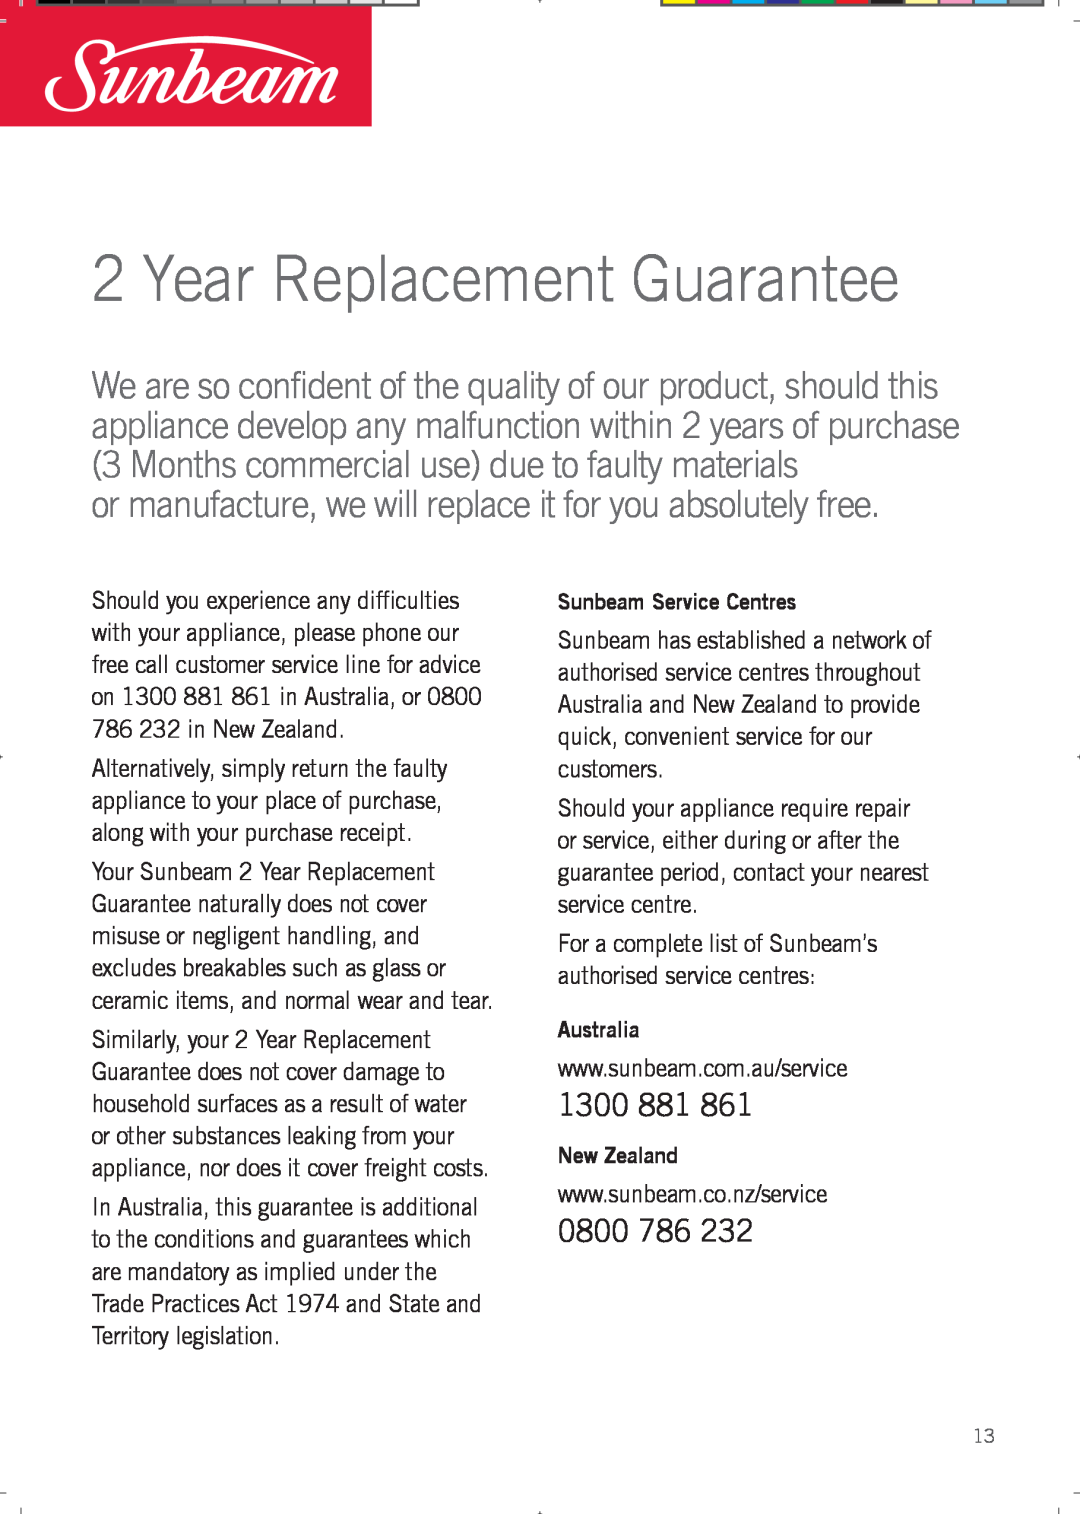 Sunbeam FA7200 Year Replacement Guarantee, or manufacture, we will replace it for you absolutely free, Australia, 1300 